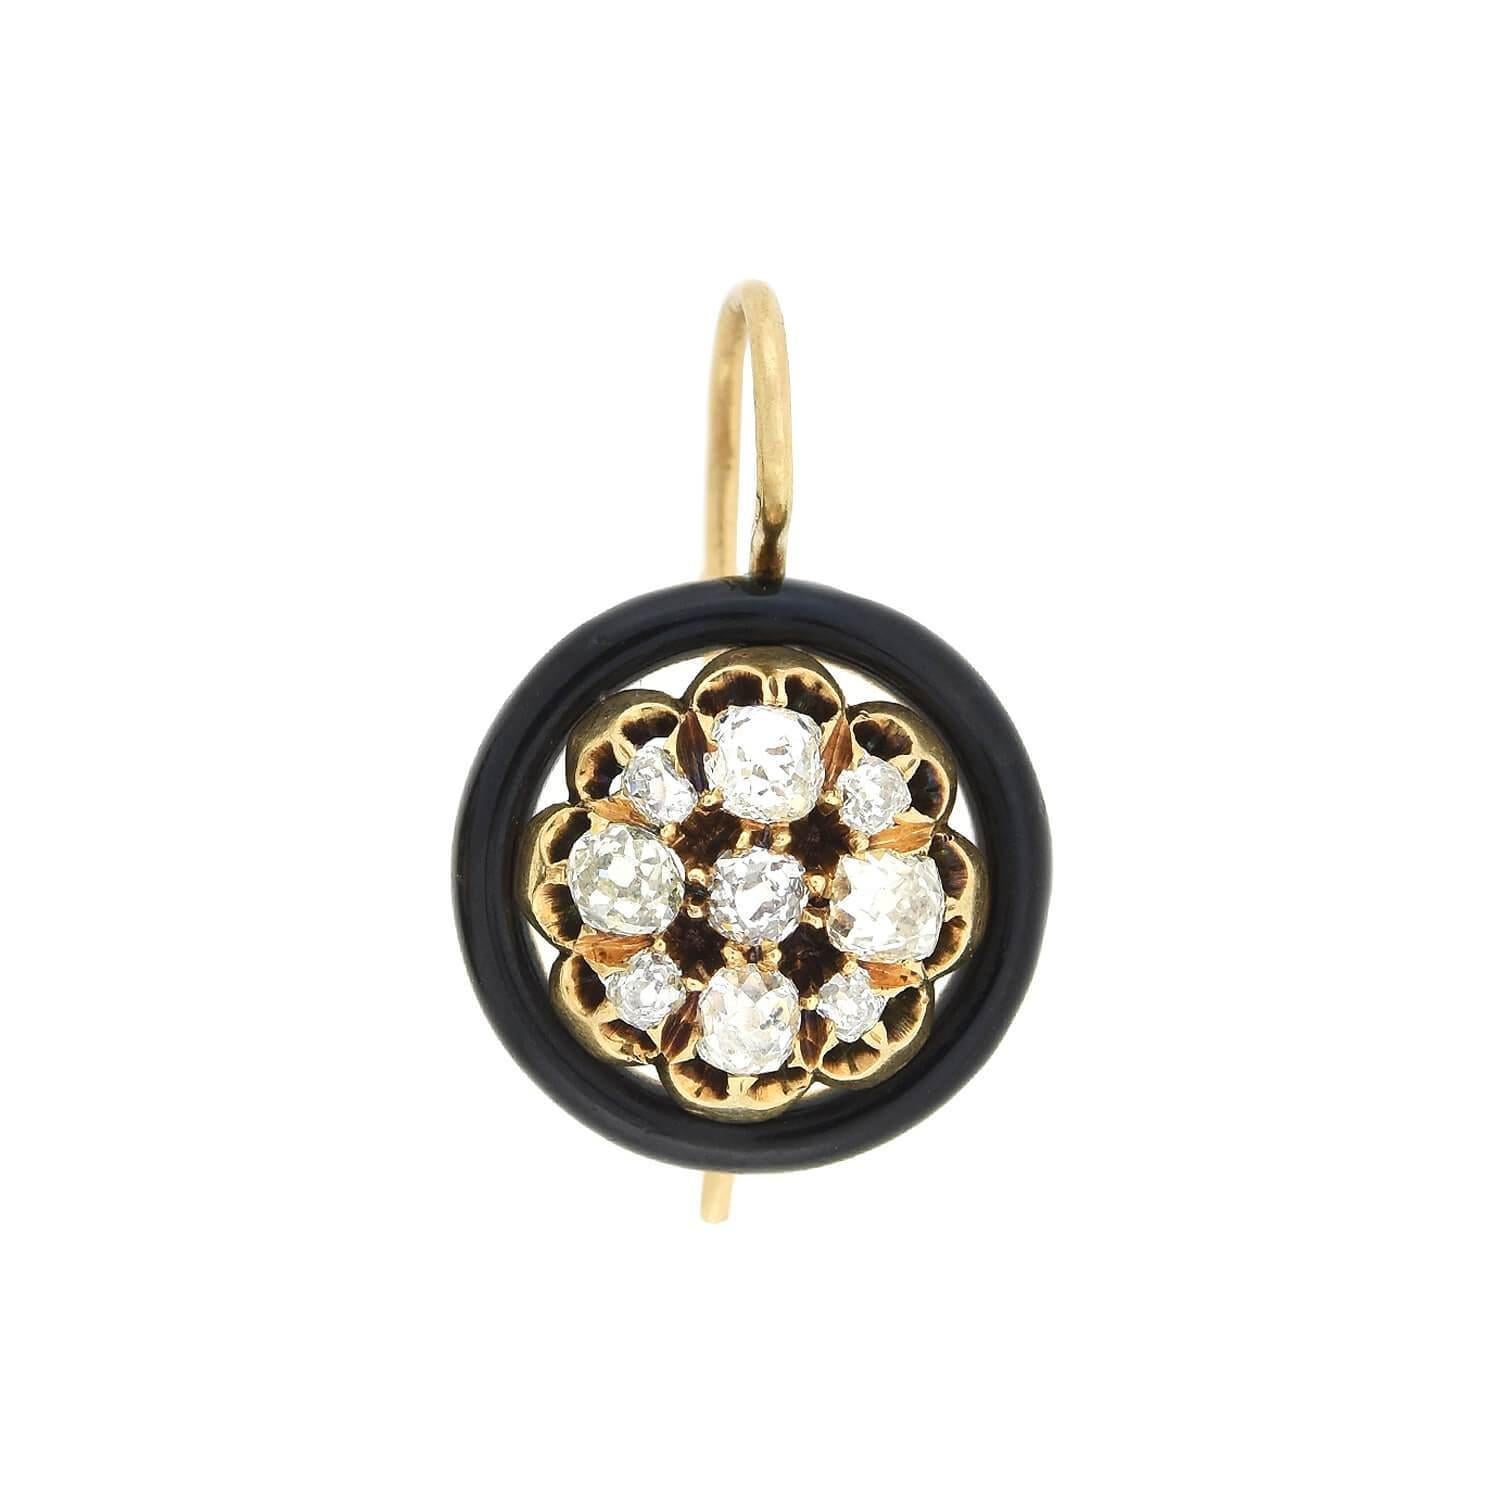 A gorgeous pair of diamond earrings from the Victorian (1880s) era! Crafted in 14kt yellow gold, these stunning earrings display a sparkling cluster of old Mine Cut diamonds framed by a border of deep black enameling. The clustered stones alternate